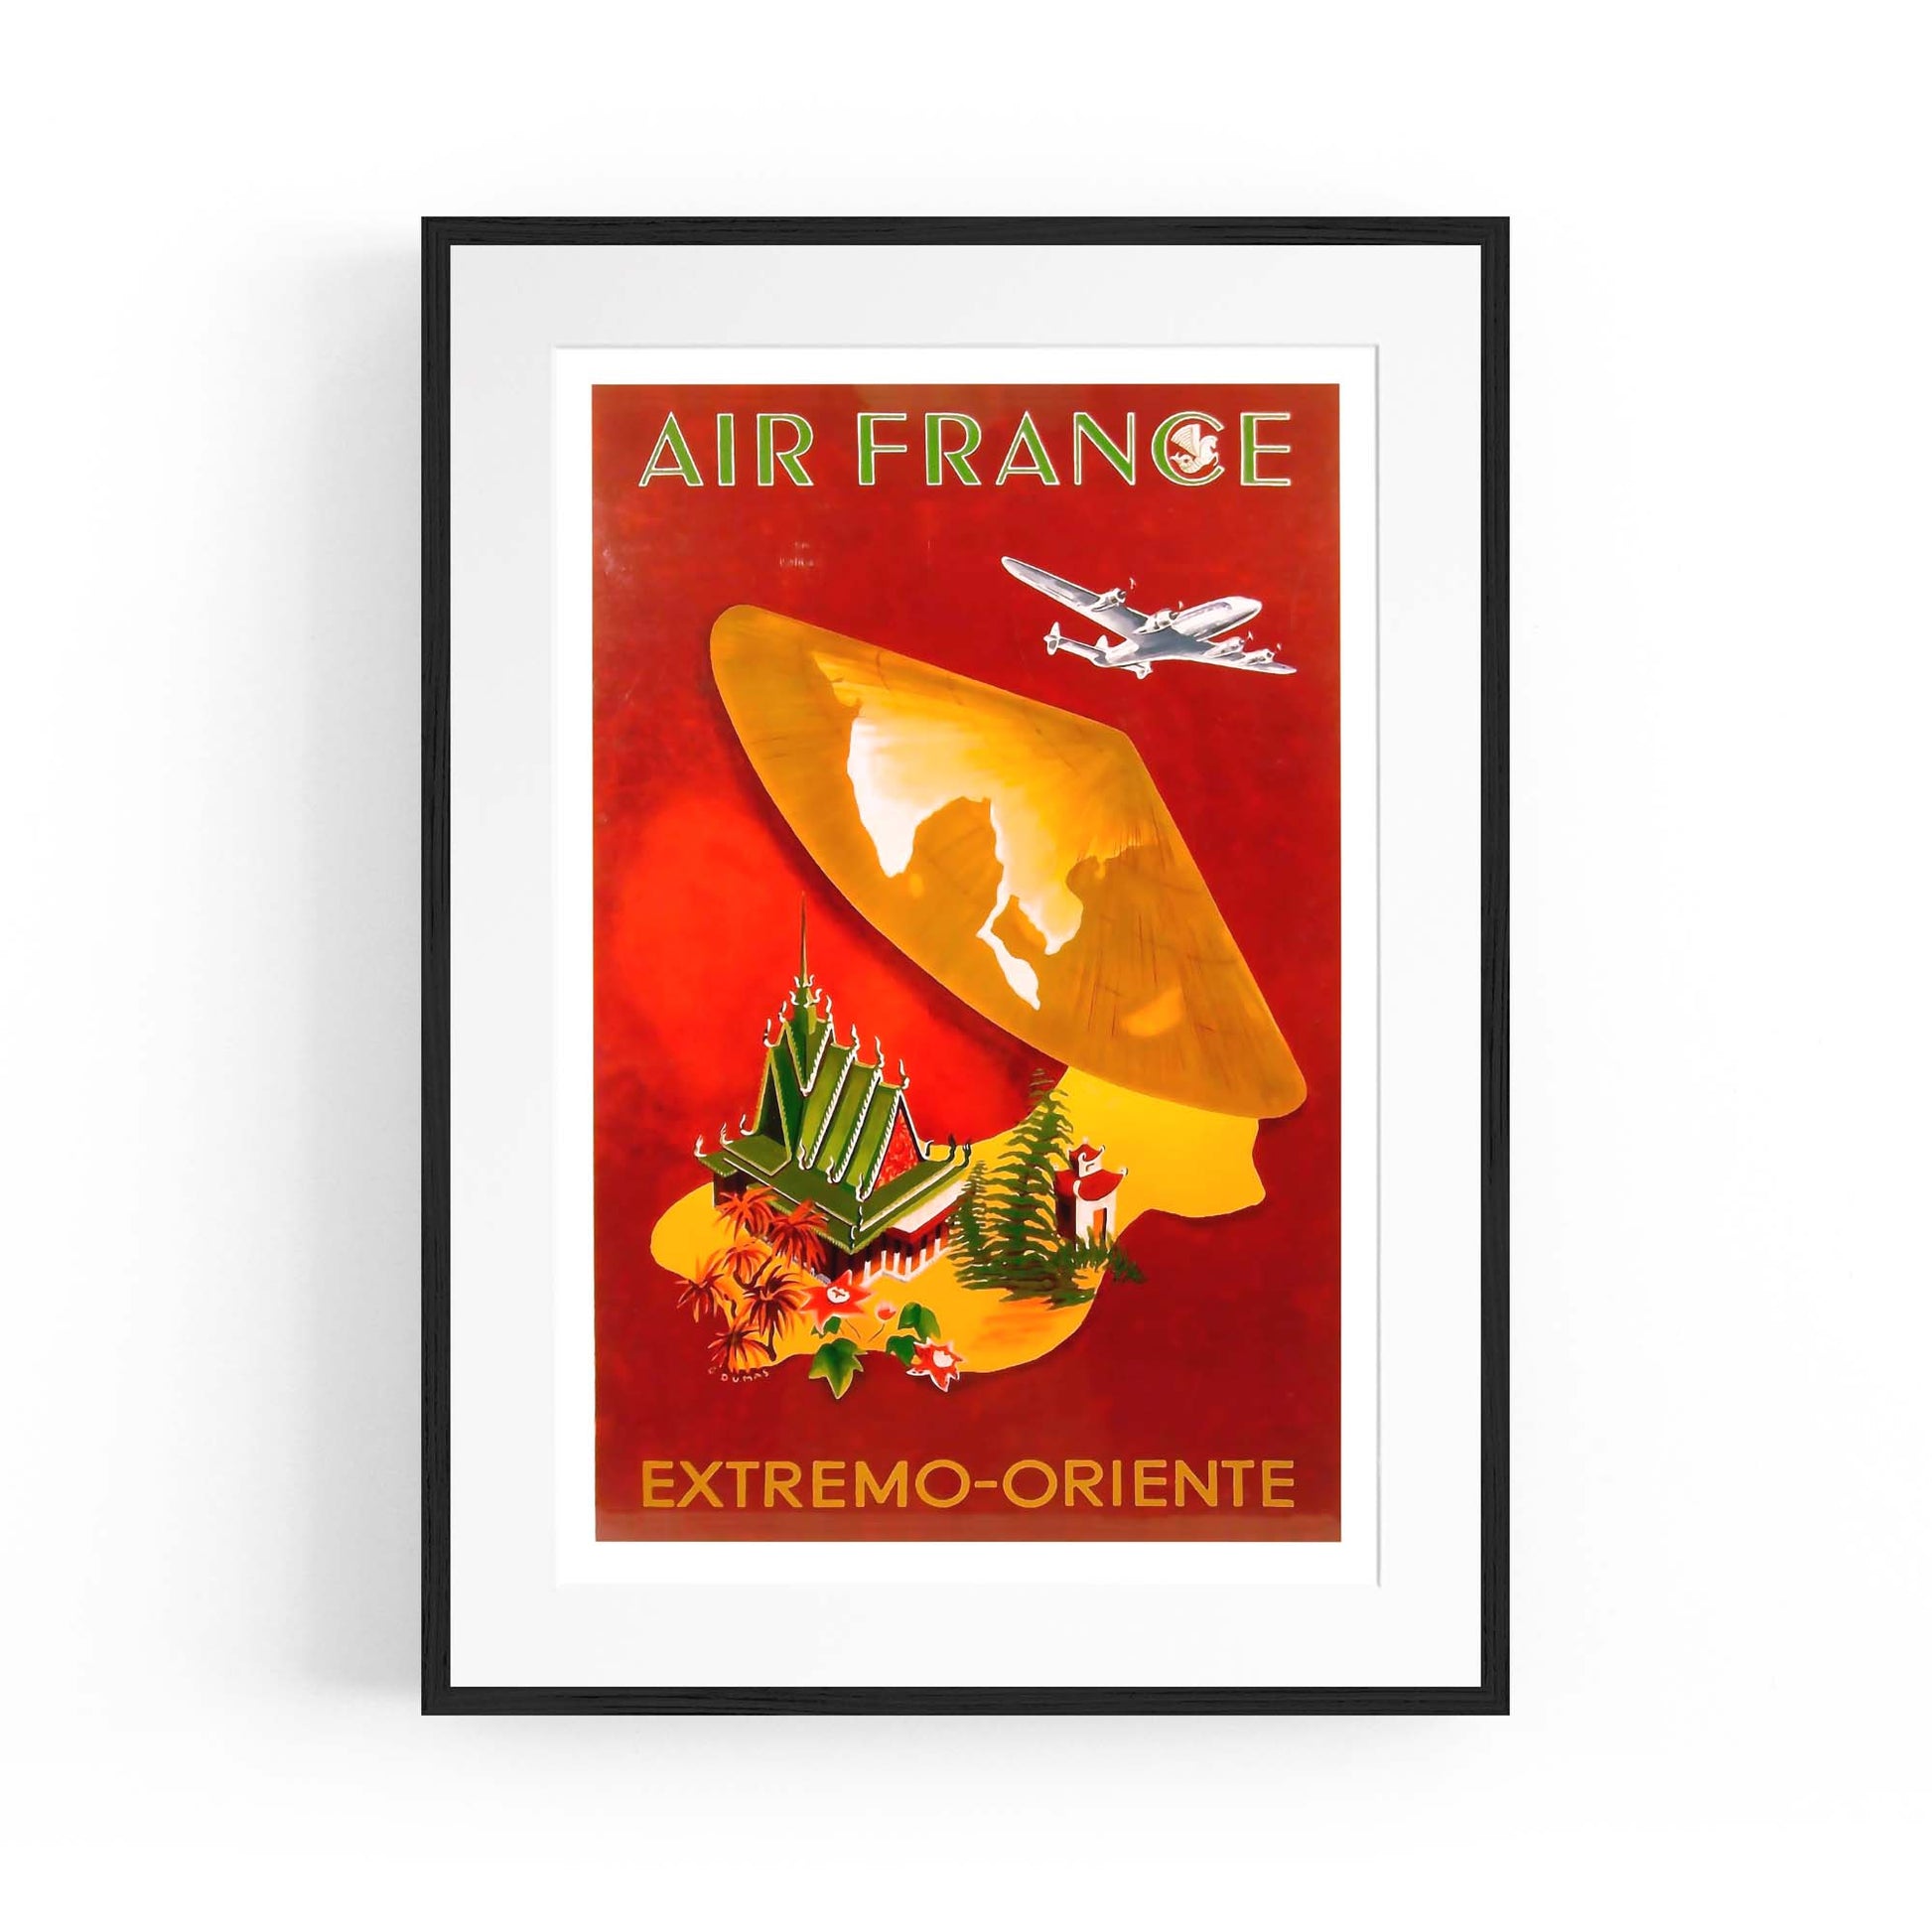 China by Air France Vintage Travel Advert Wall Art - The Affordable Art Company